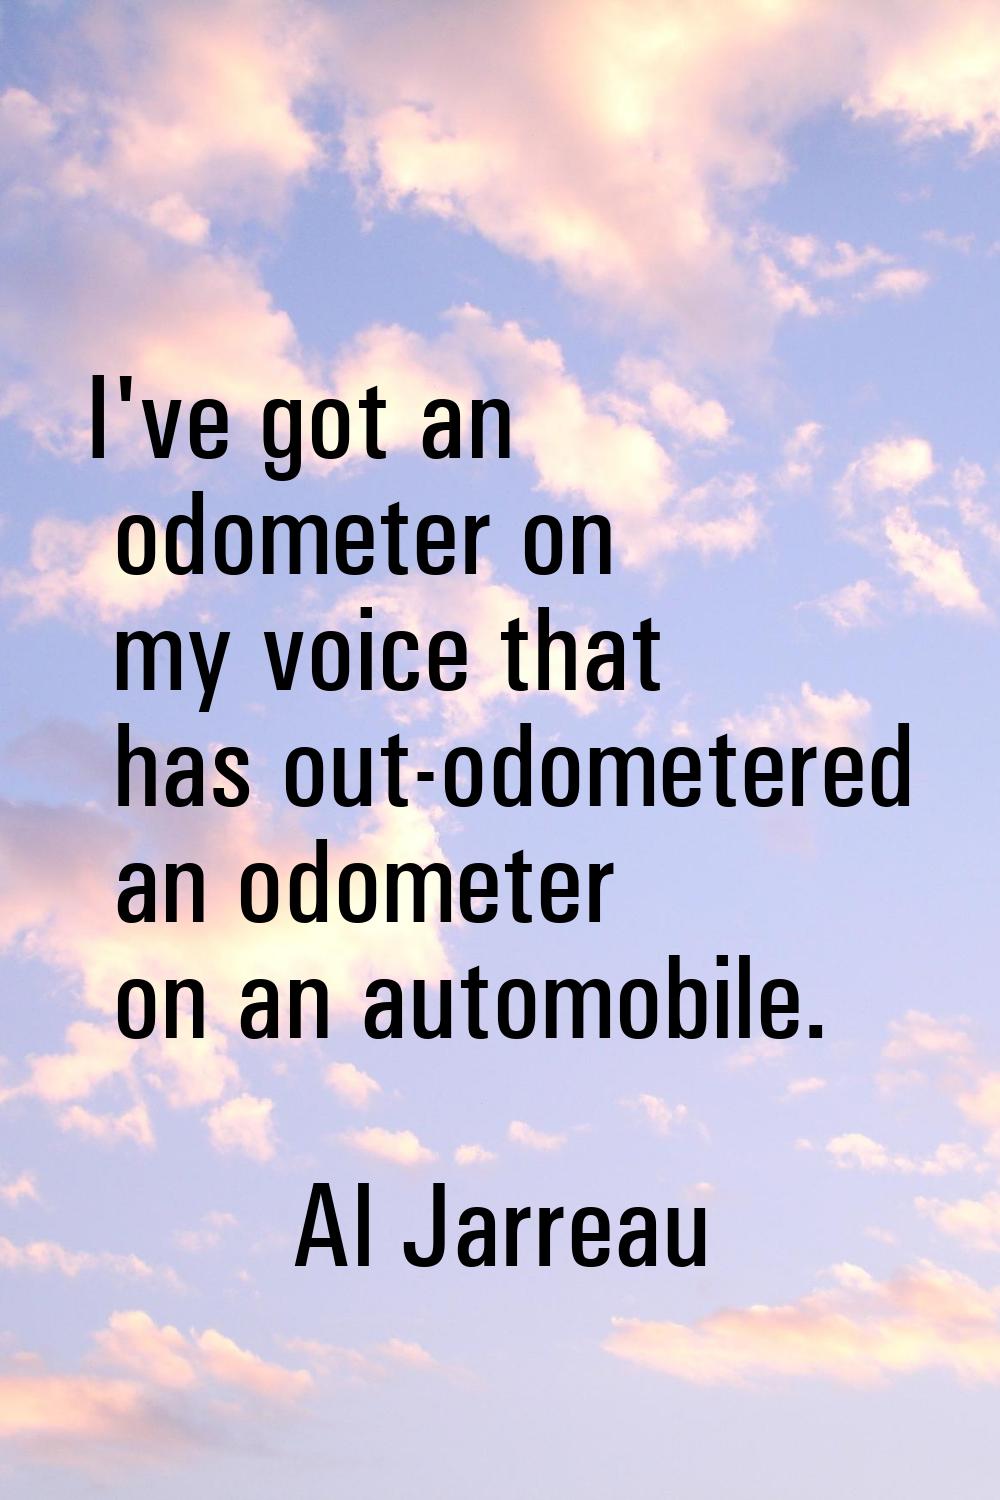 I've got an odometer on my voice that has out-odometered an odometer on an automobile.